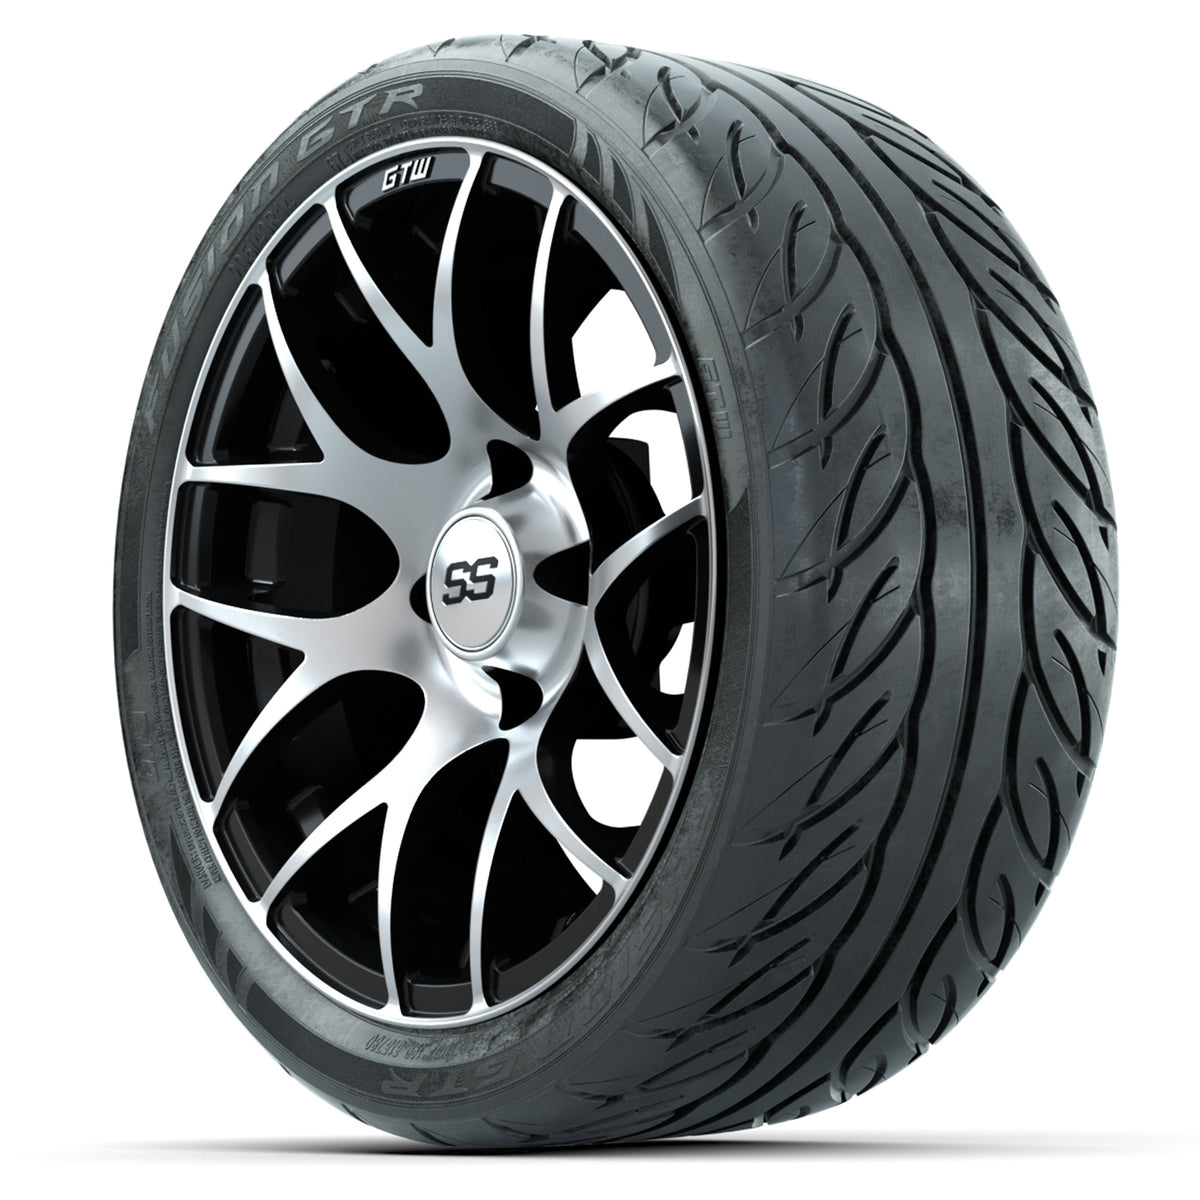 205/45R17 Tires - 17 Inch Tires